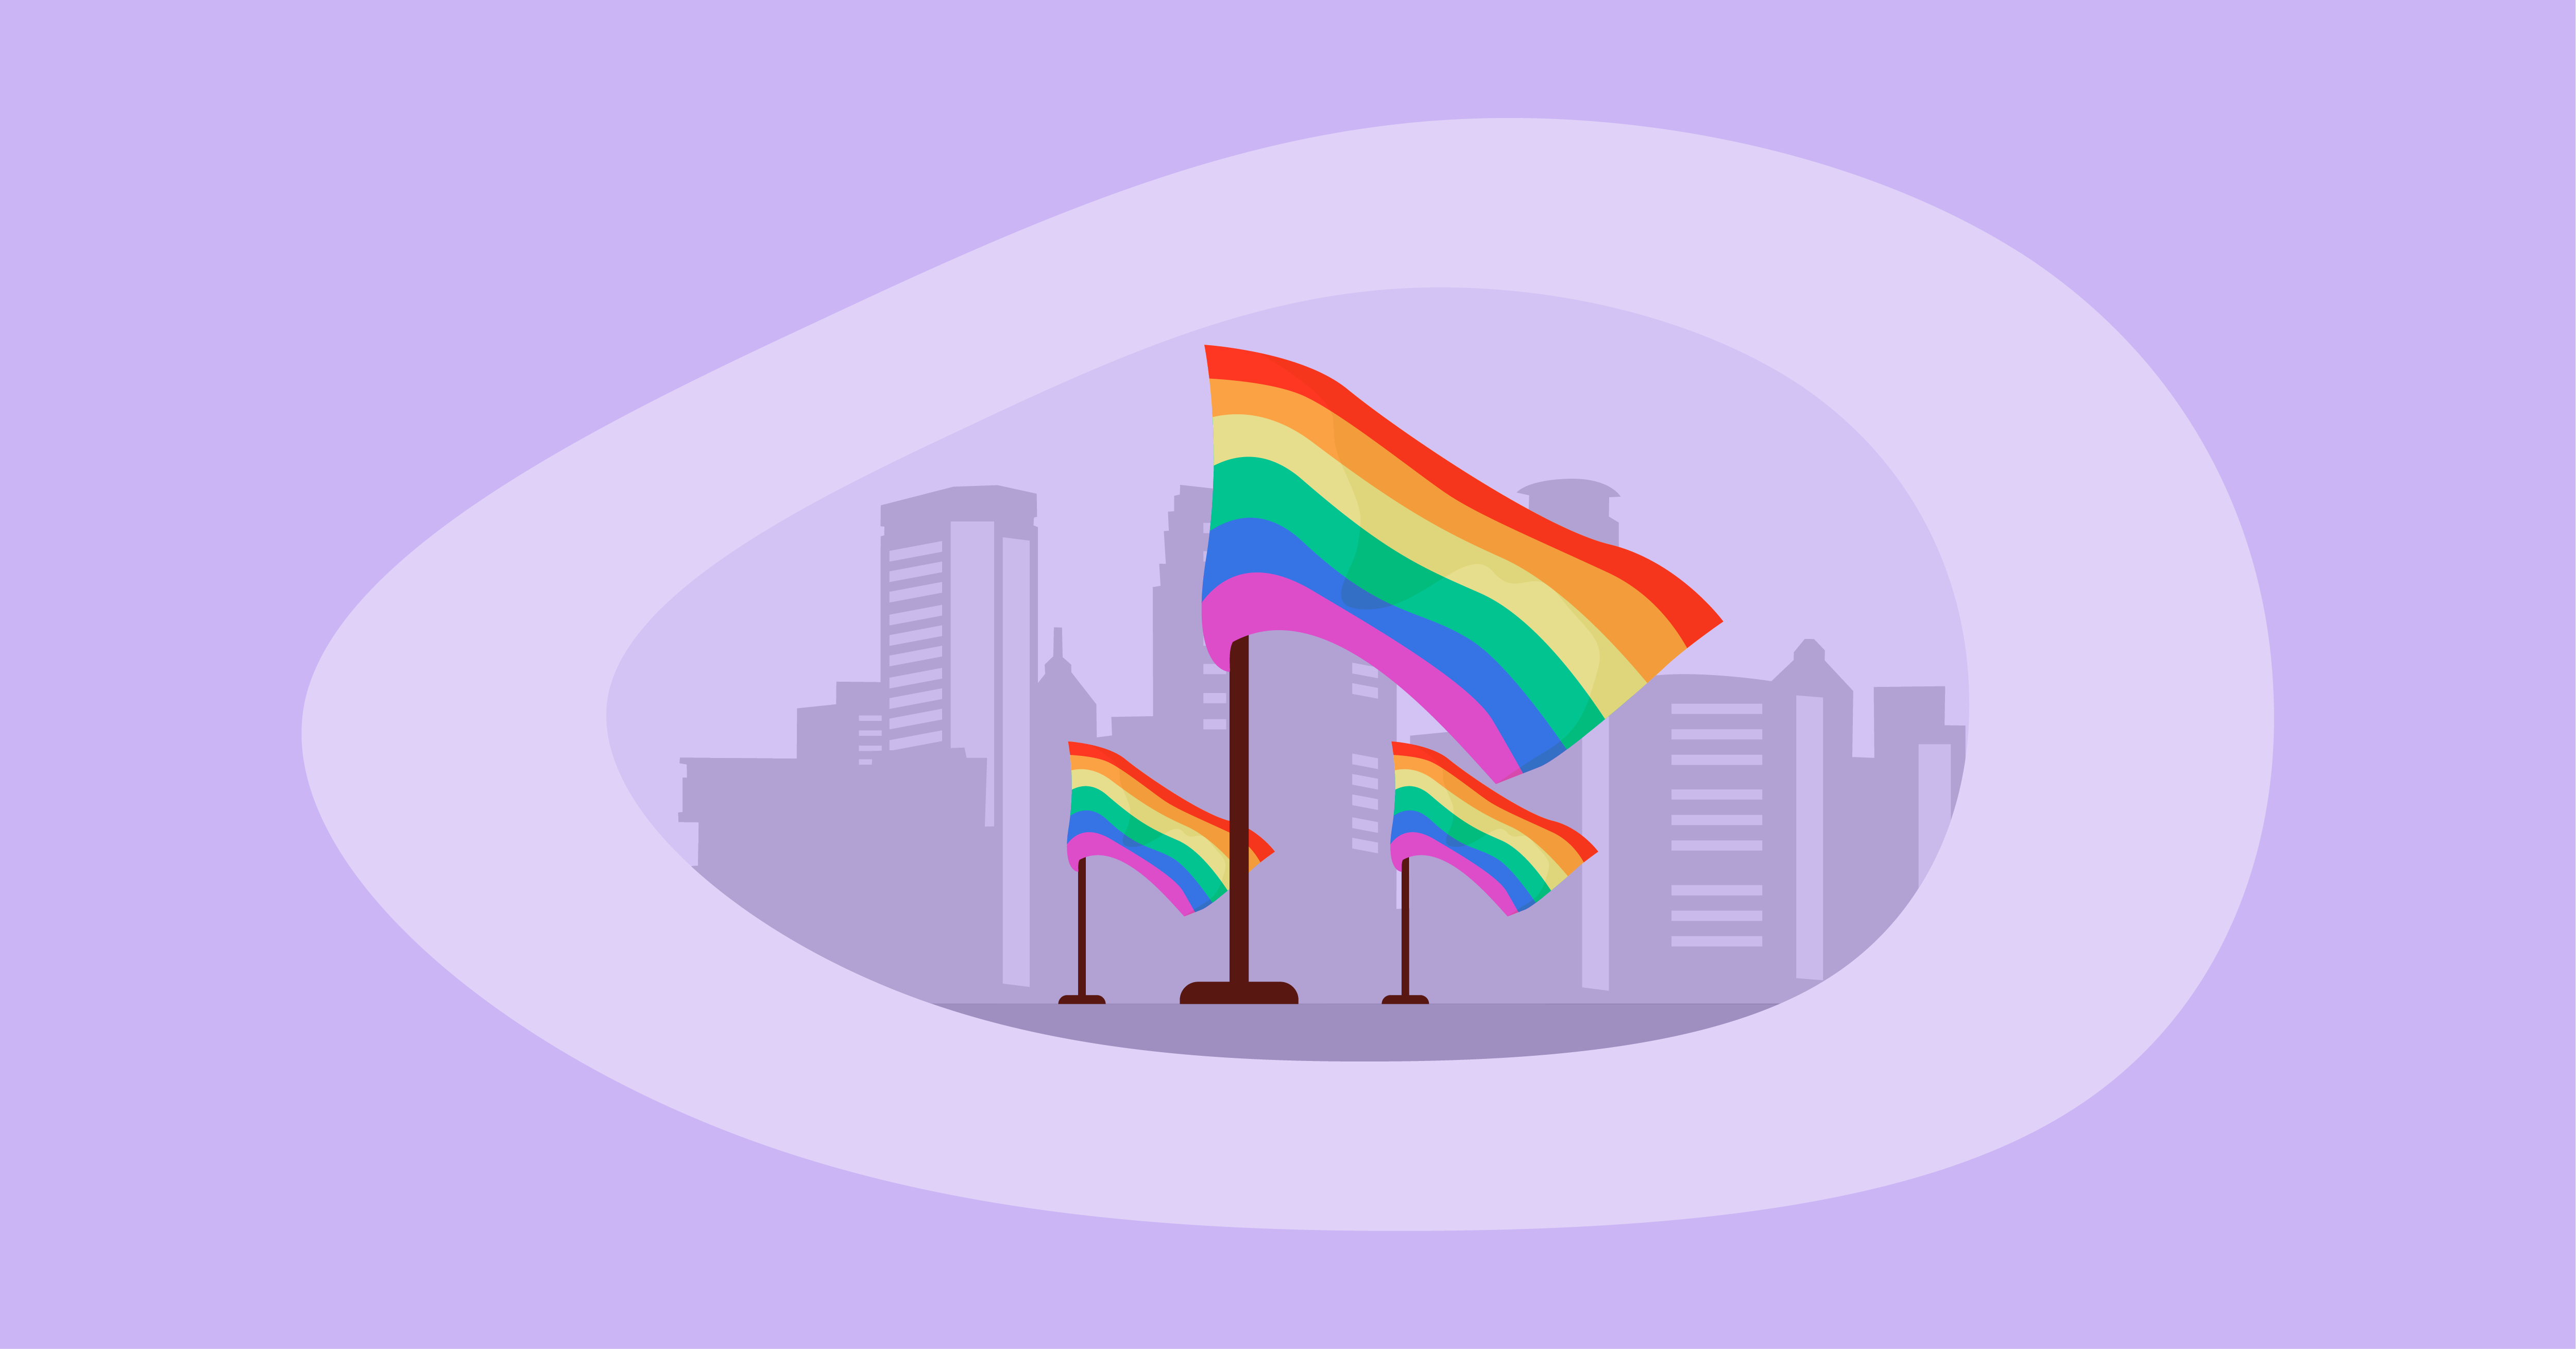 Attempted illustration of a flag to represent the LGBTQ+ youth community